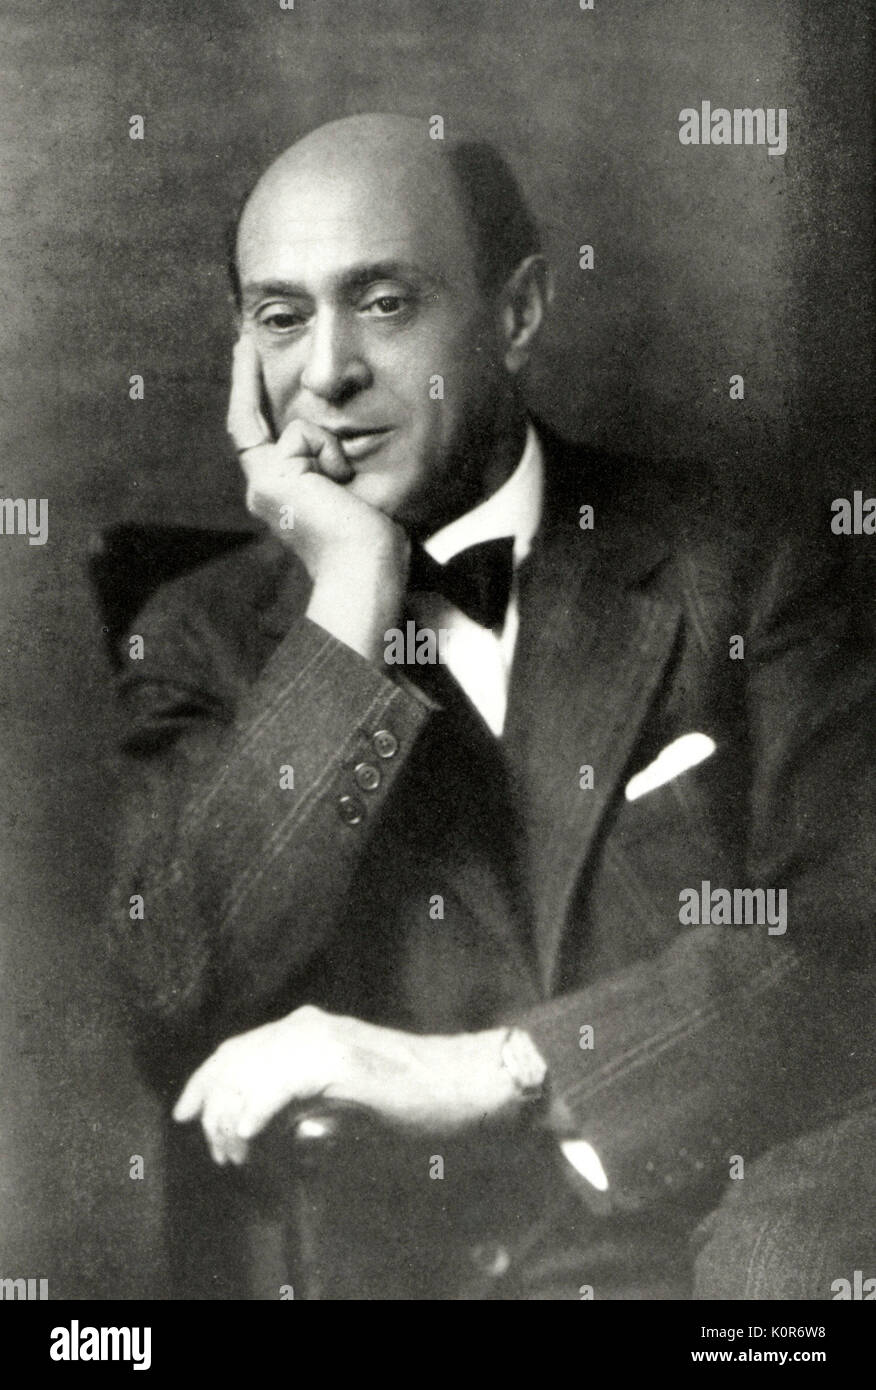 Arnold Schoenberg in the 1920's portrait. Austrian composer 13 April 1874 - 13 July 1951. Stock Photo